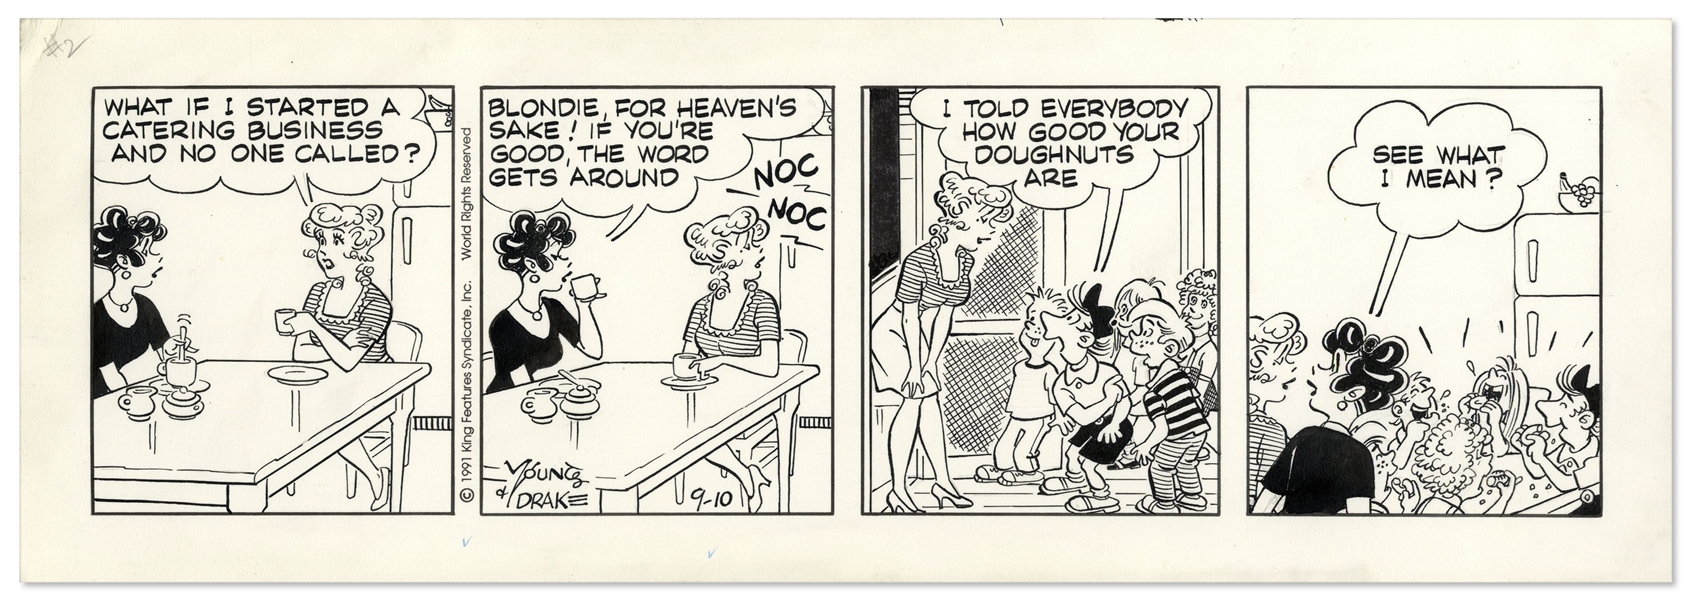 ''Blondie'' Comic Strip From 1991 -- Blondie's On Her Way to a Successful Catering Business